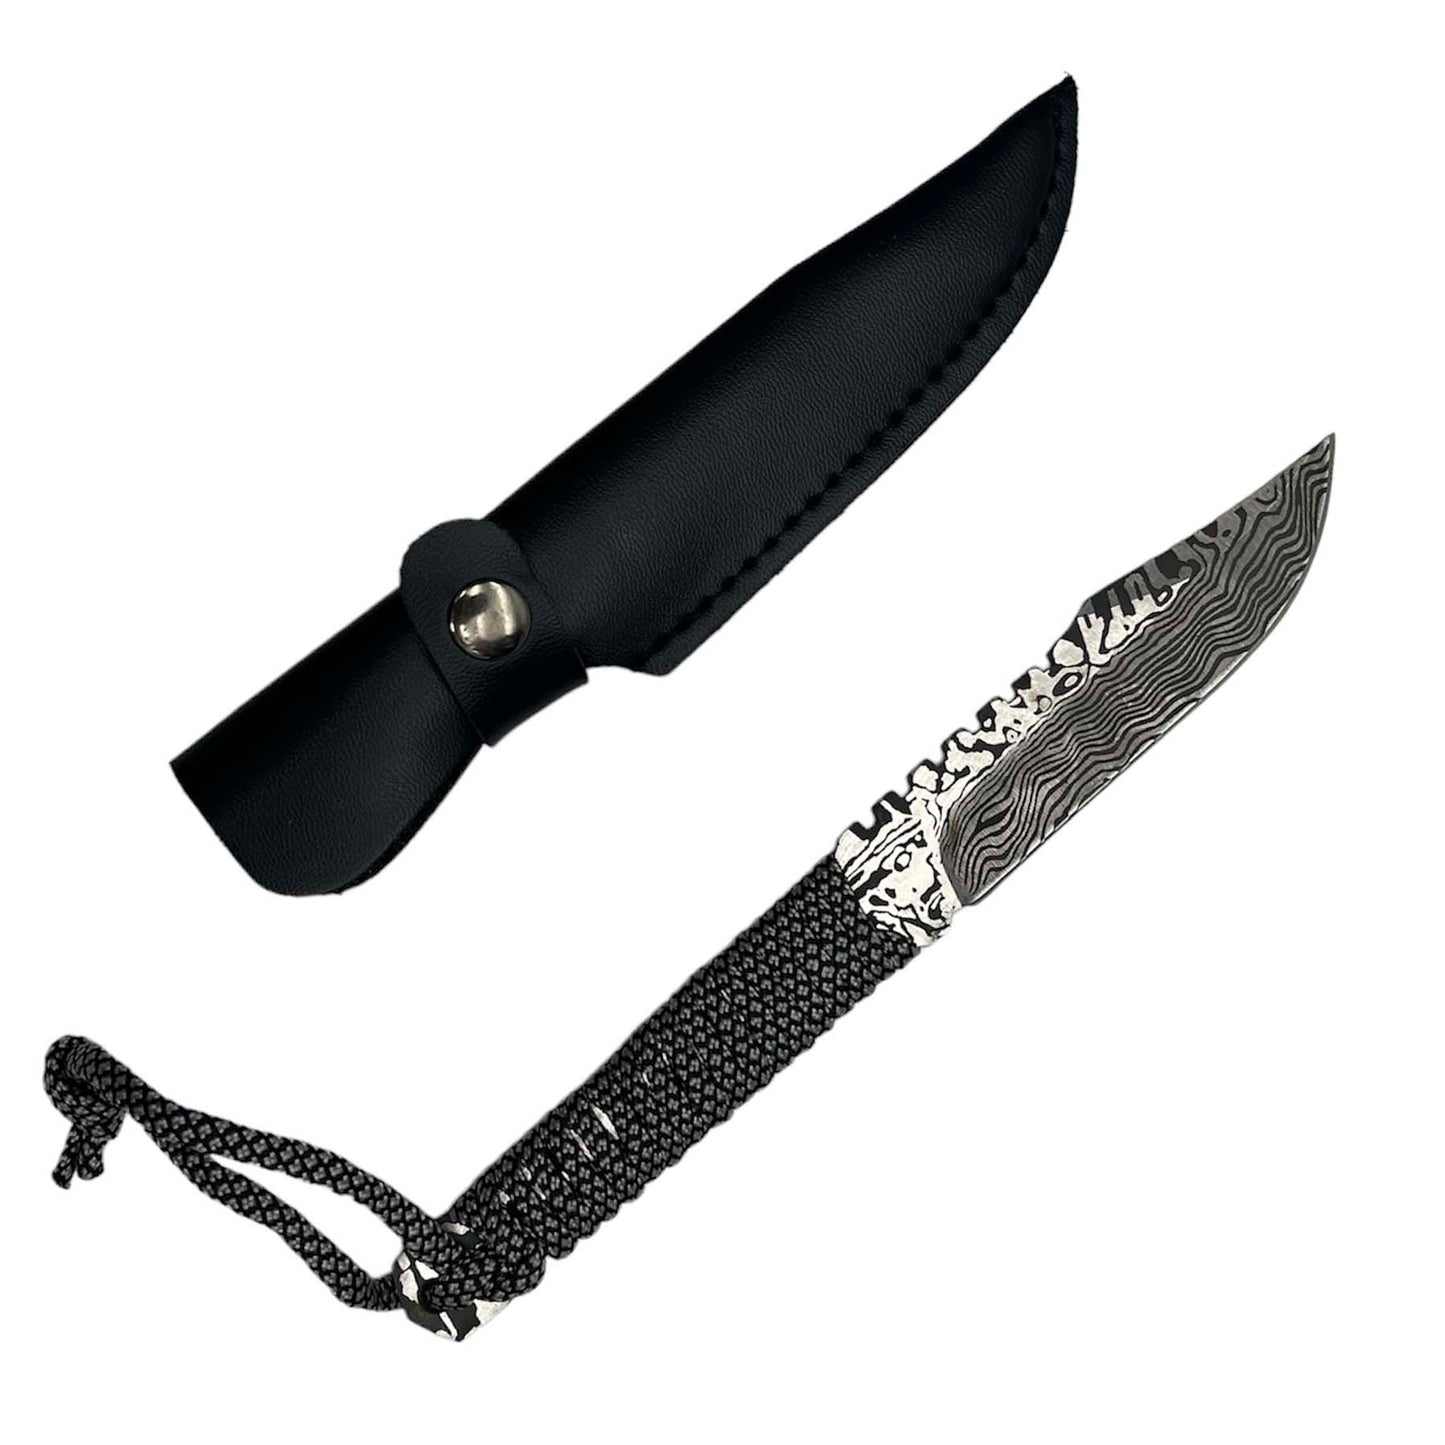 8" Full Tang Fixed Patterned Blade Hunting Knives_1